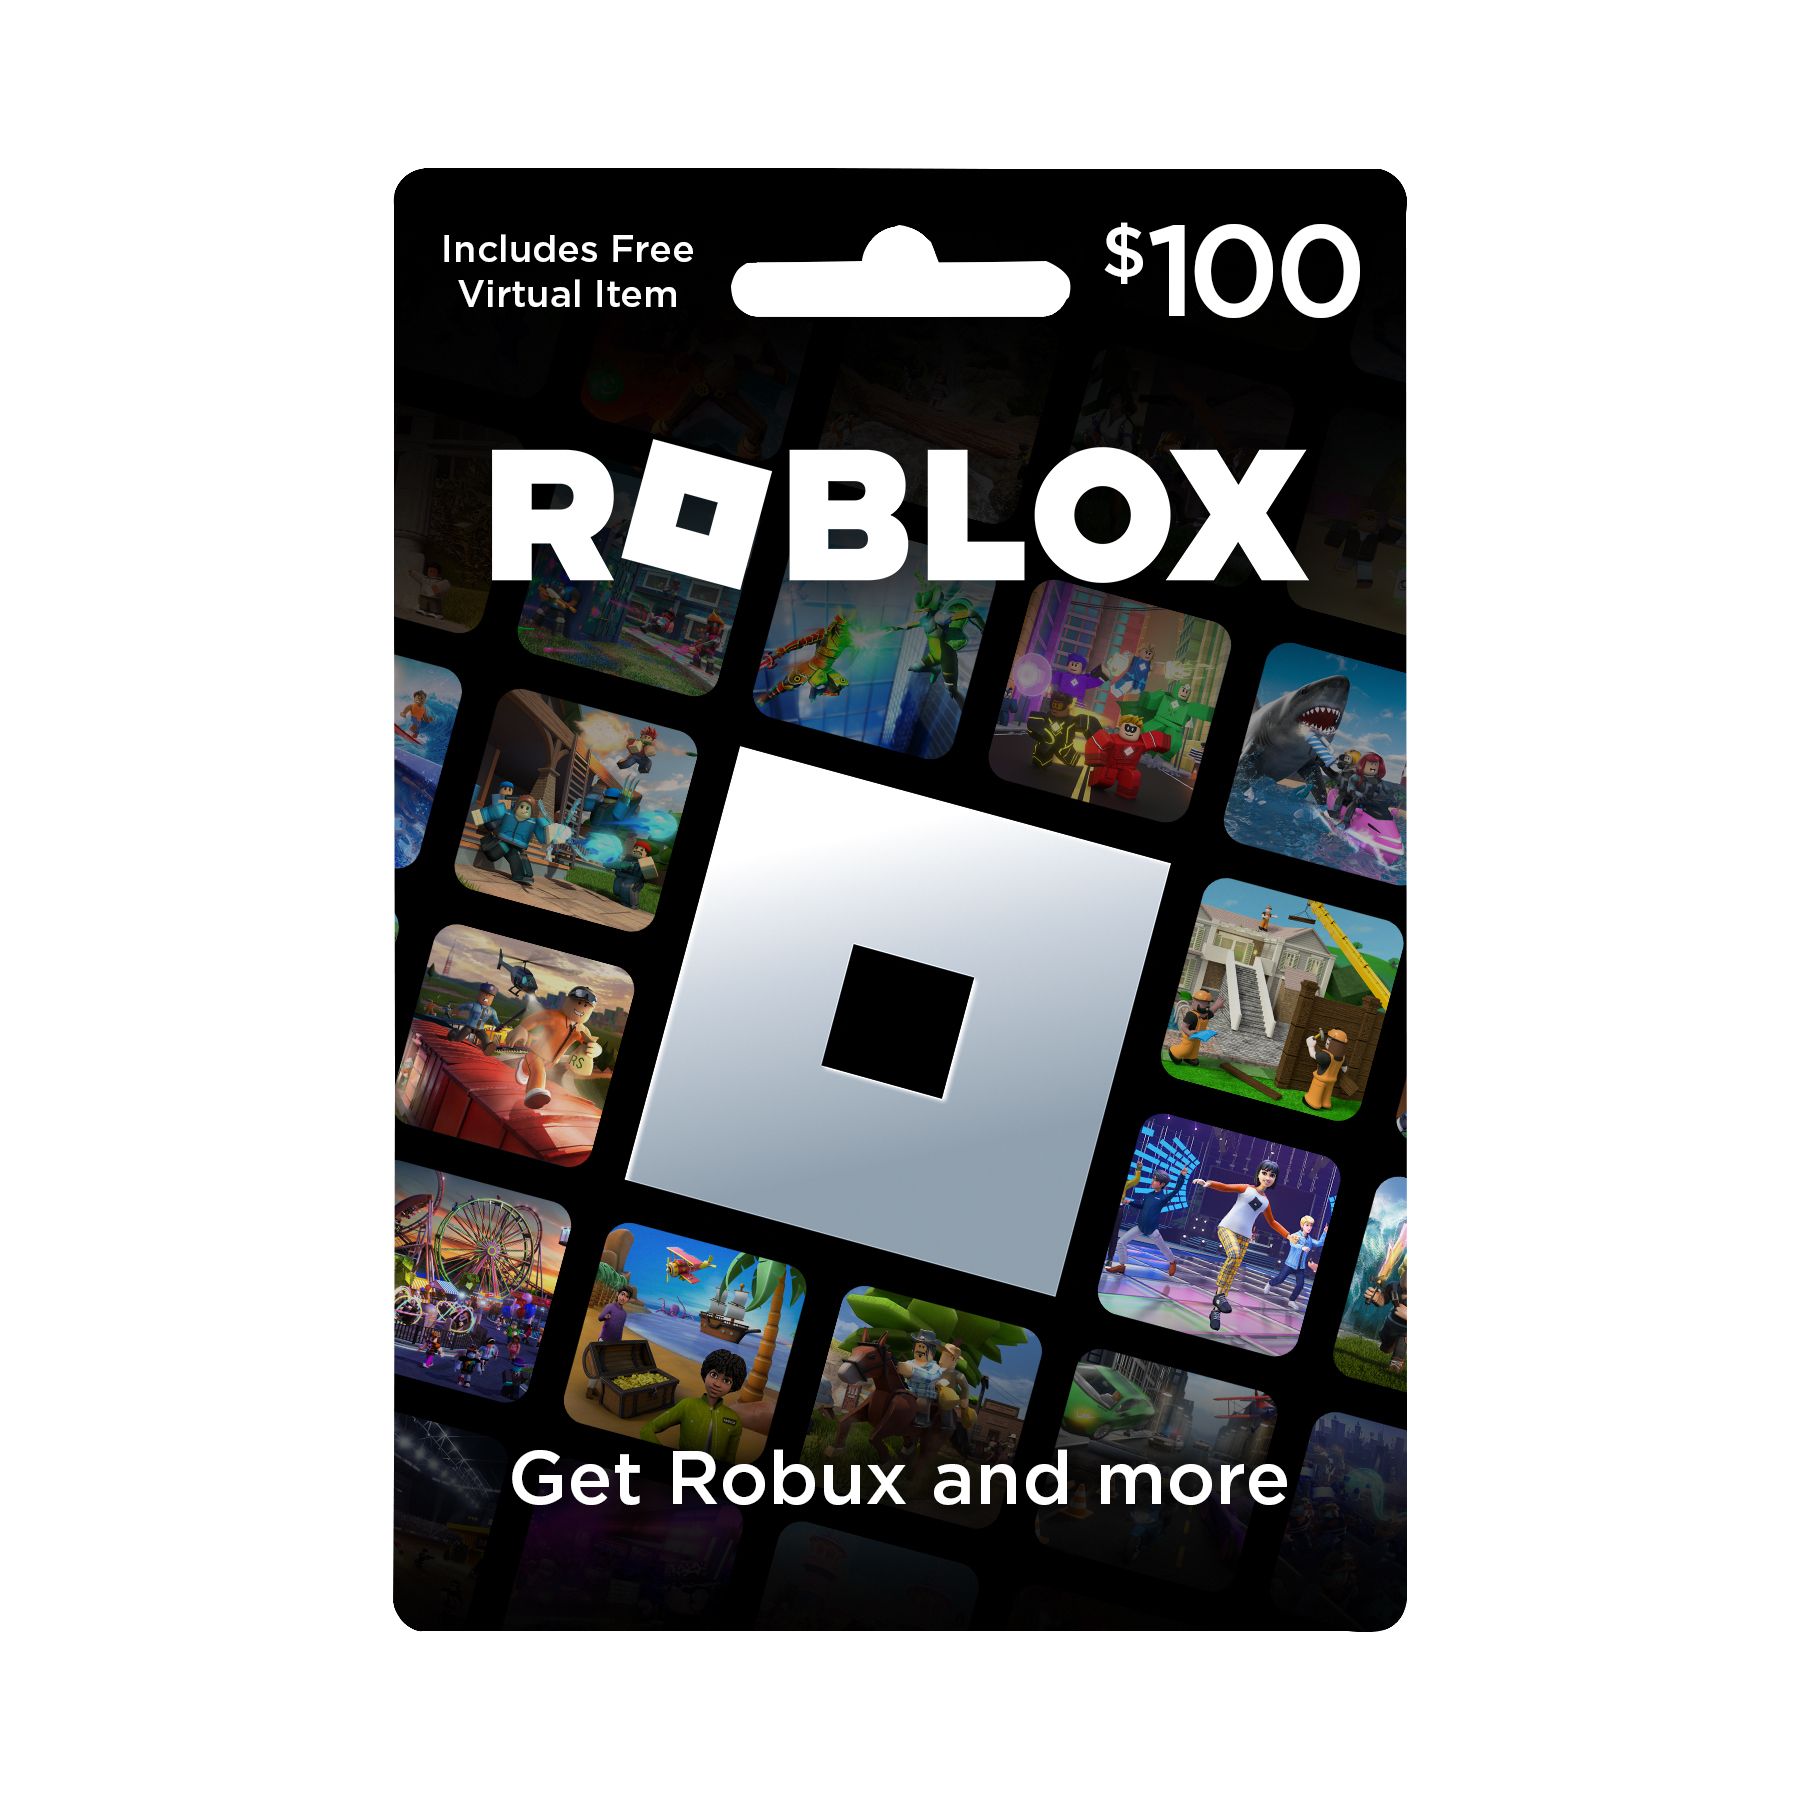 Roblox Roblox $25 Game Card | The Warehouse